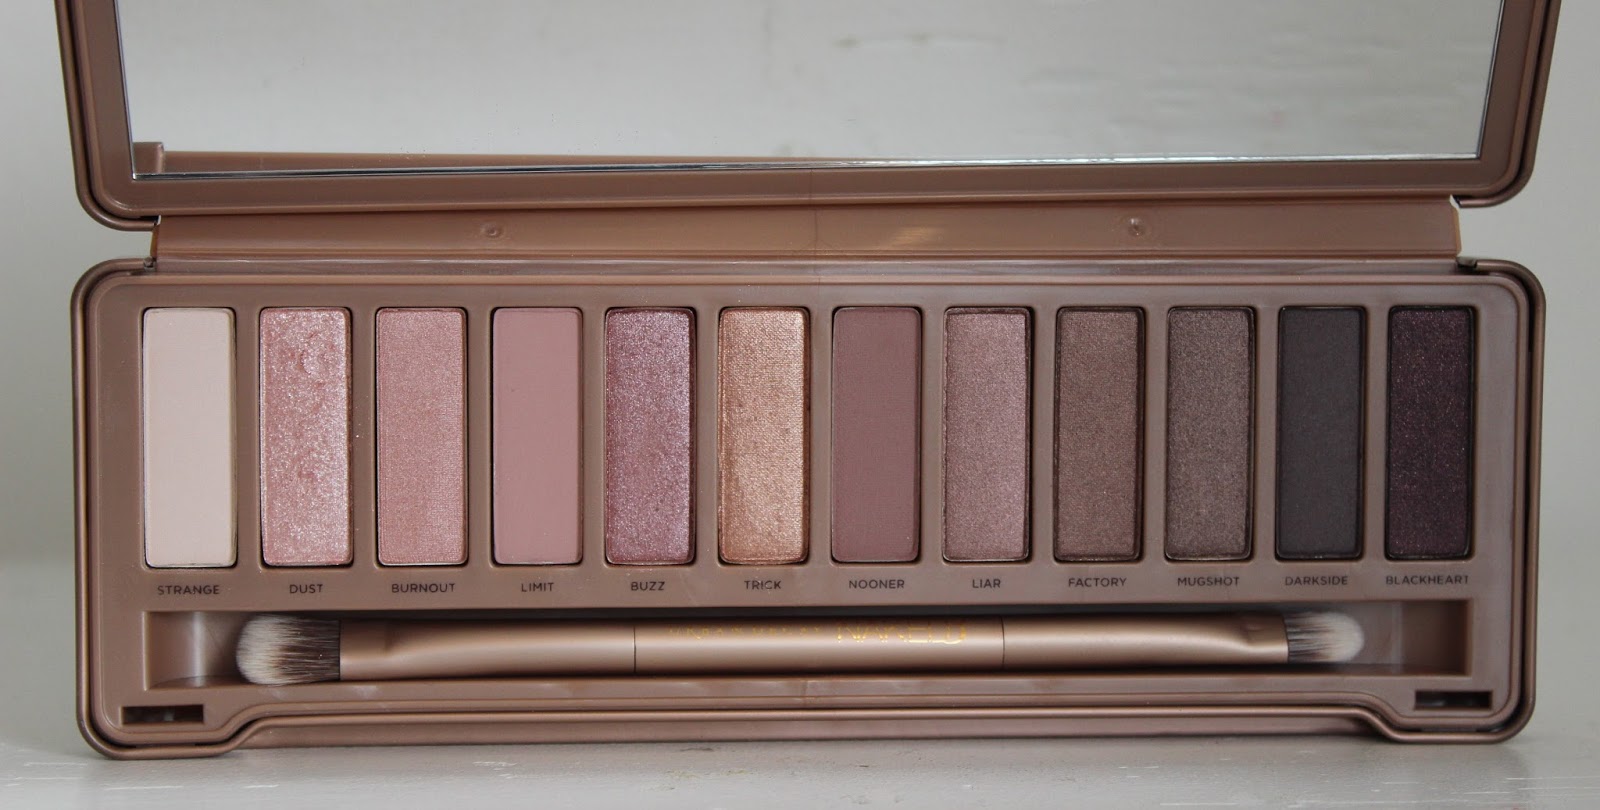 Real Asian Beauty: Urban Decay Naked 3 Palette Review